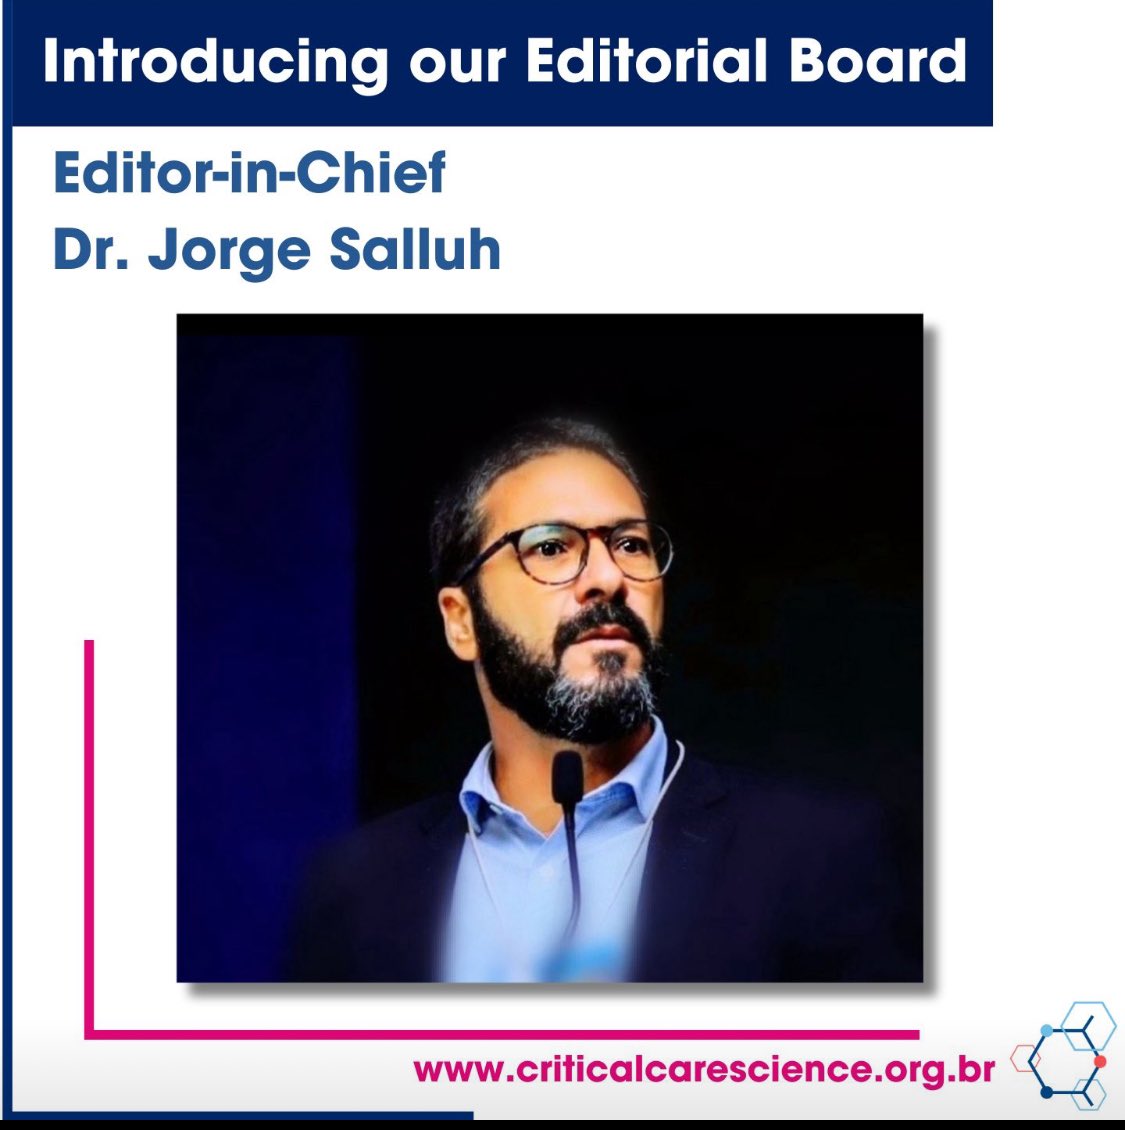 Jorge Salluh, MD, PhD, is the new Editor-in-Chief of @ccs_amib_spci since Jan 2024- distinguished researcher at @Institutodor & Prof in the postgraduate program of IM at @ufrj, his top priorities 4 the journal are international collaboration, diversity & inclusivity #ICU #FOAMcc